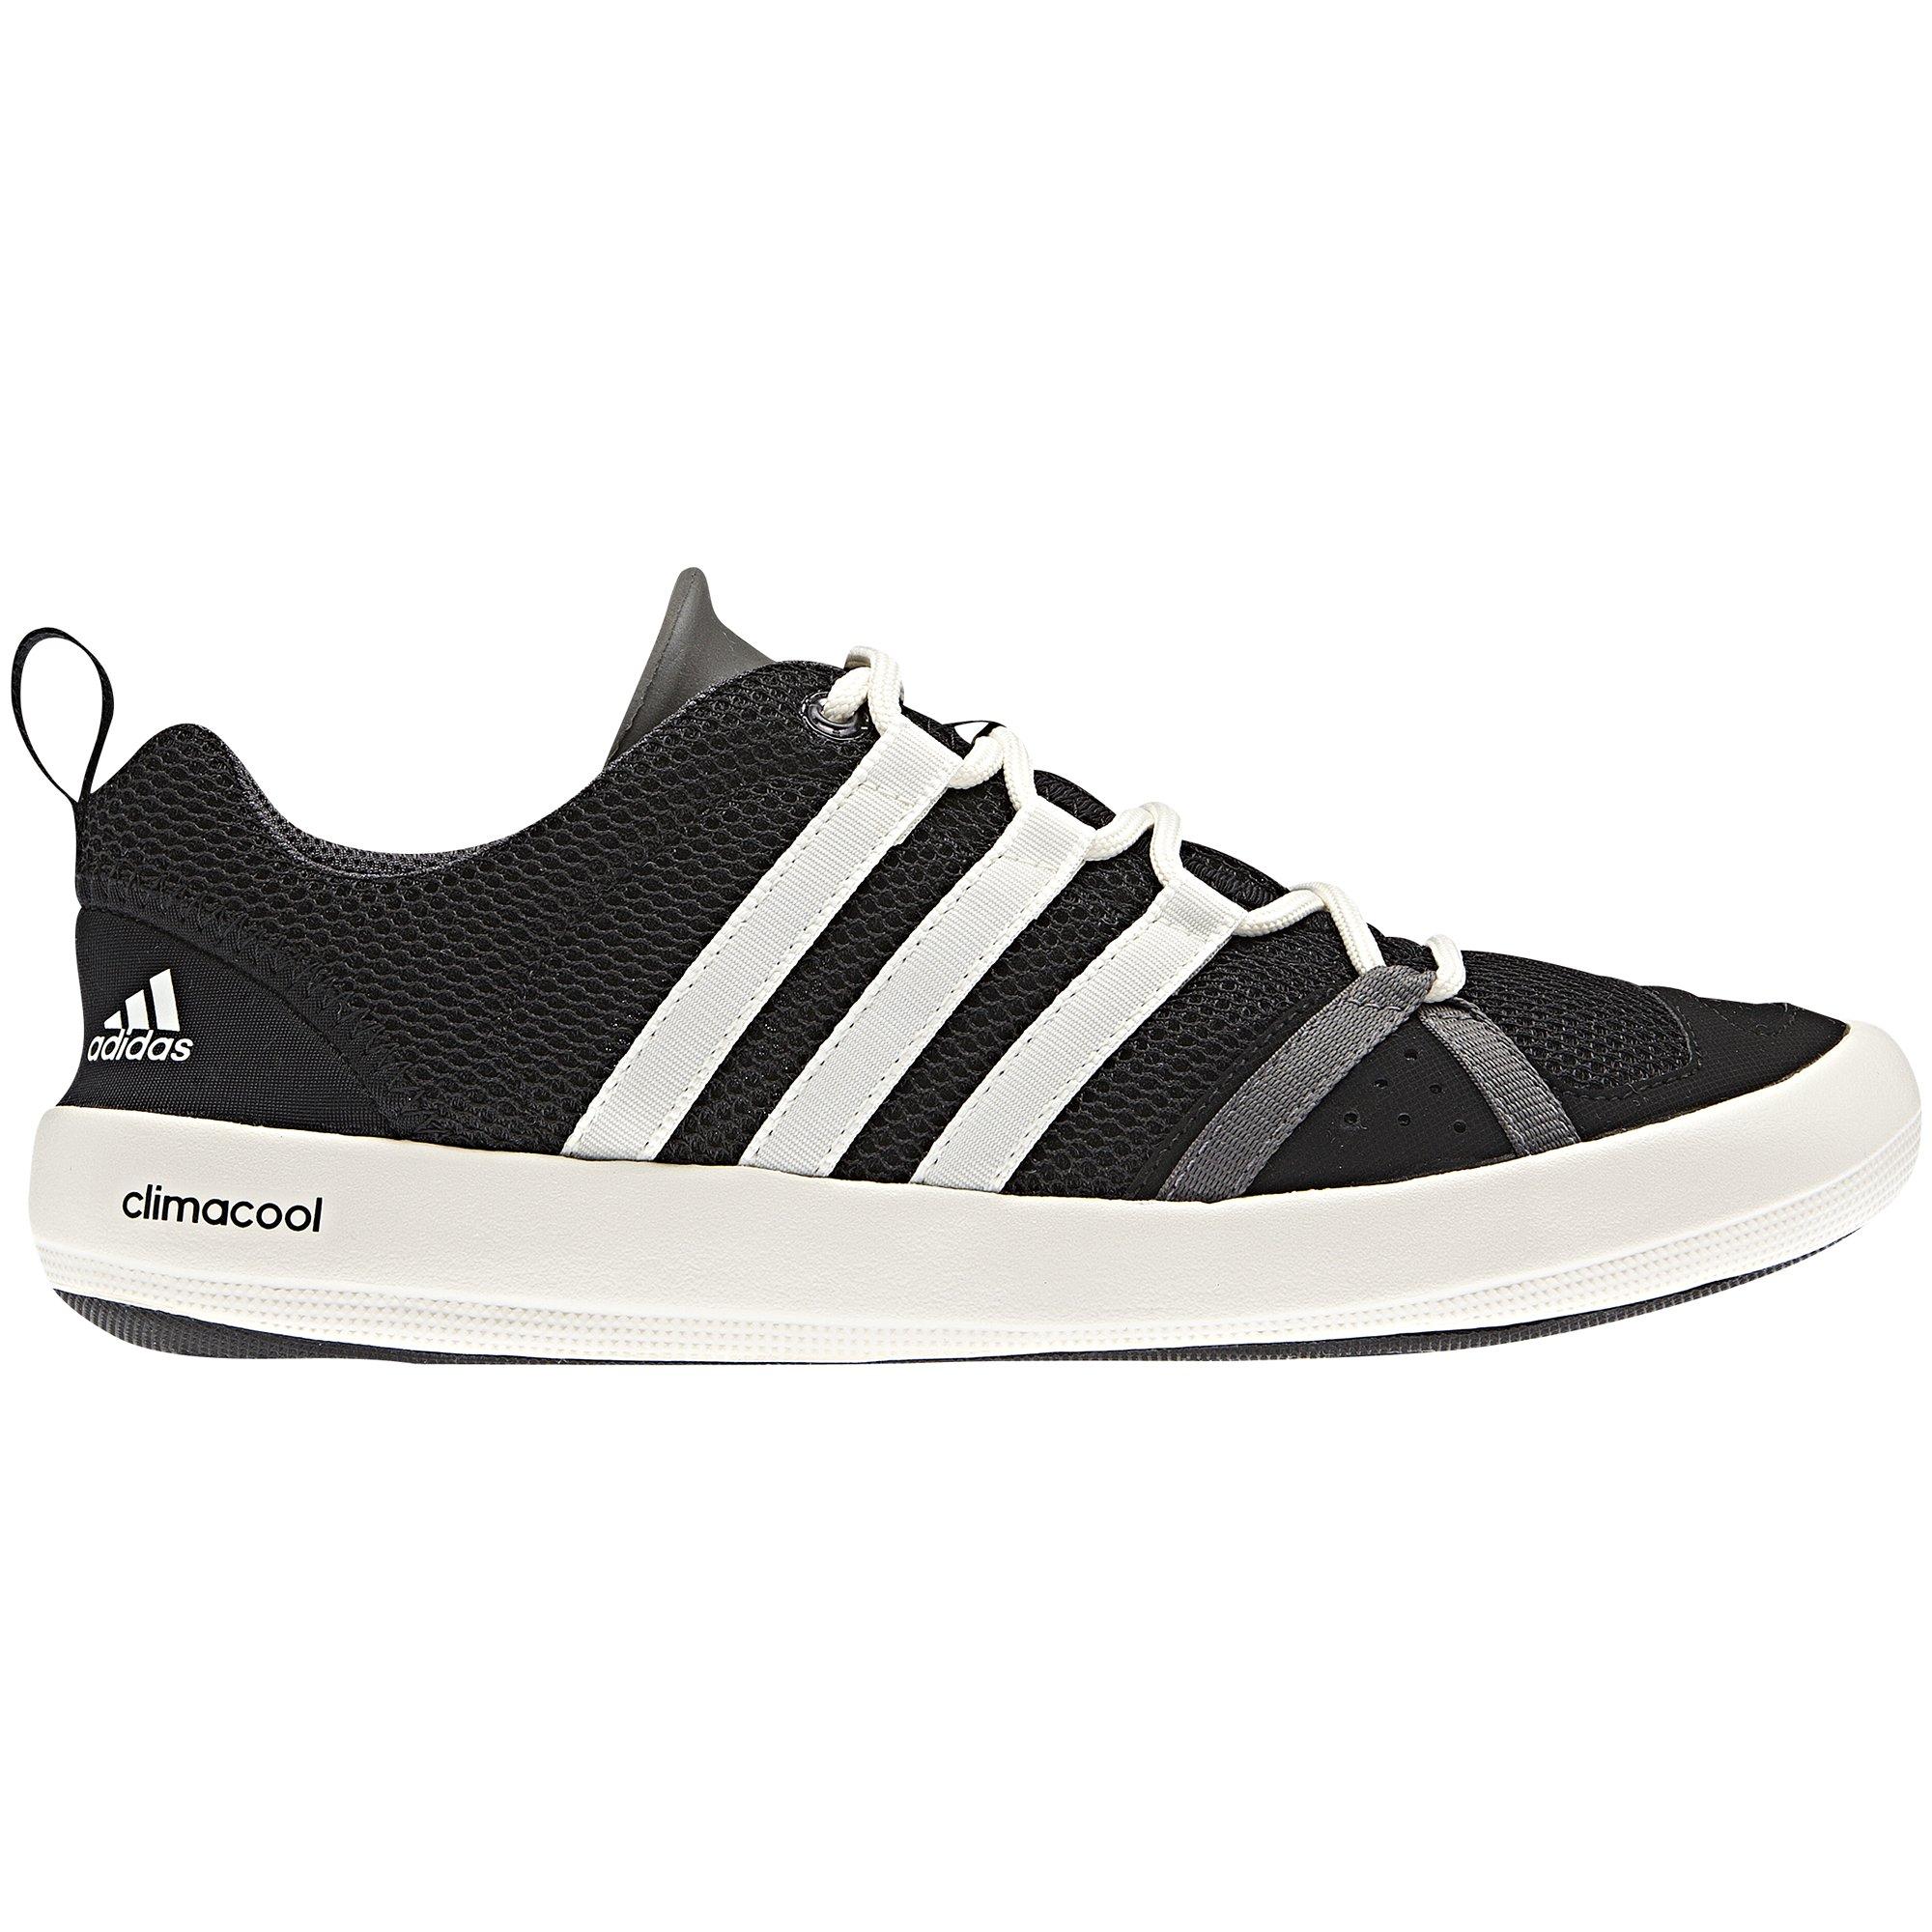 Foto adidas climacool BOAT LACE Hombre